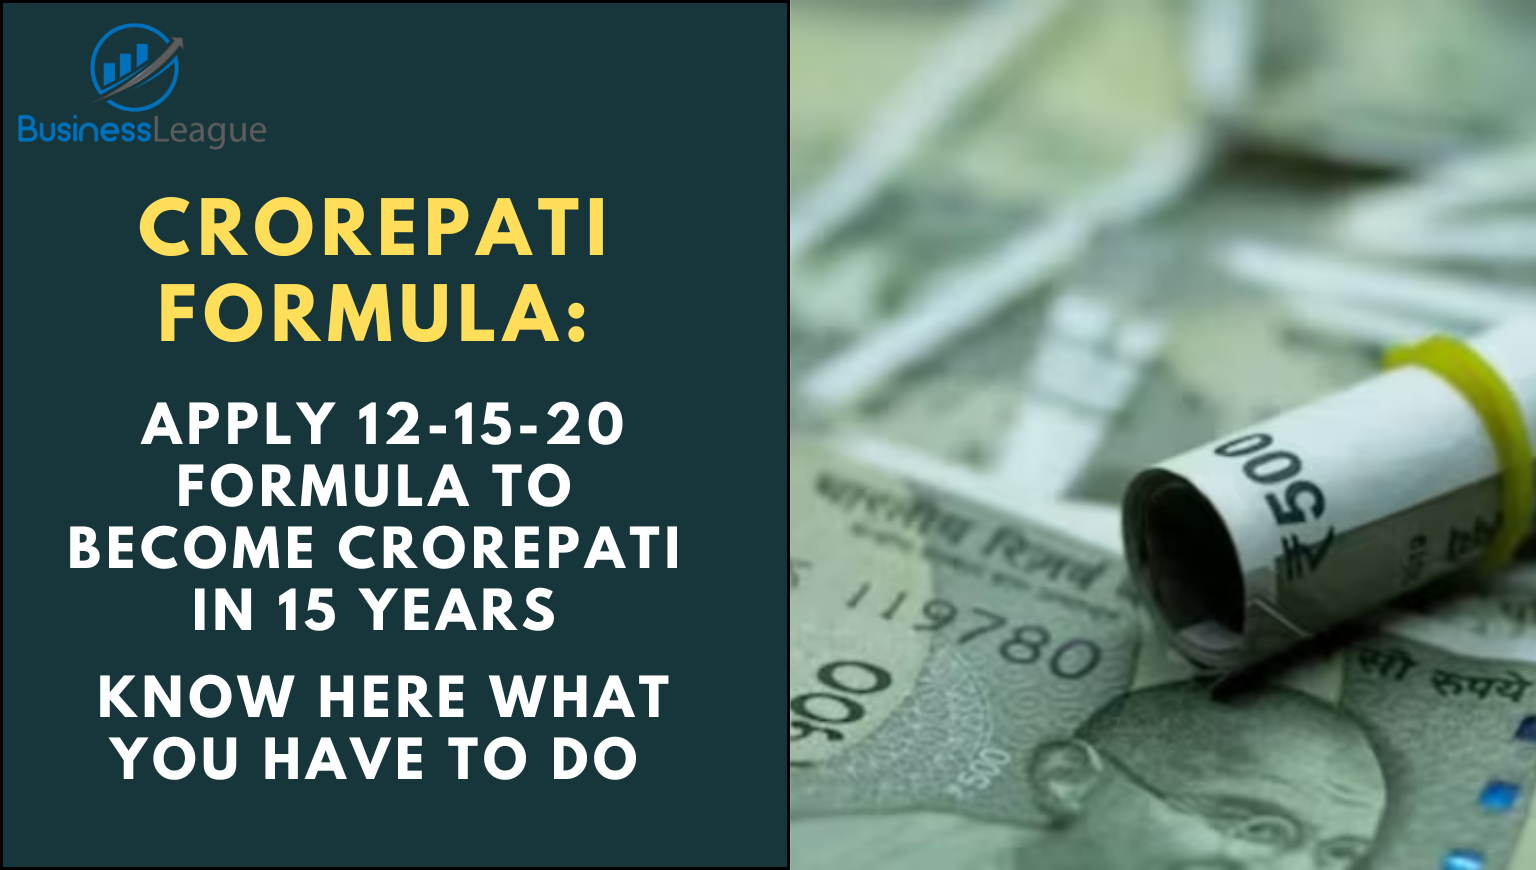 Crorepati Formula: Apply 12-15-20 formula to become Crorepati in 15 years, Know here what you have to do